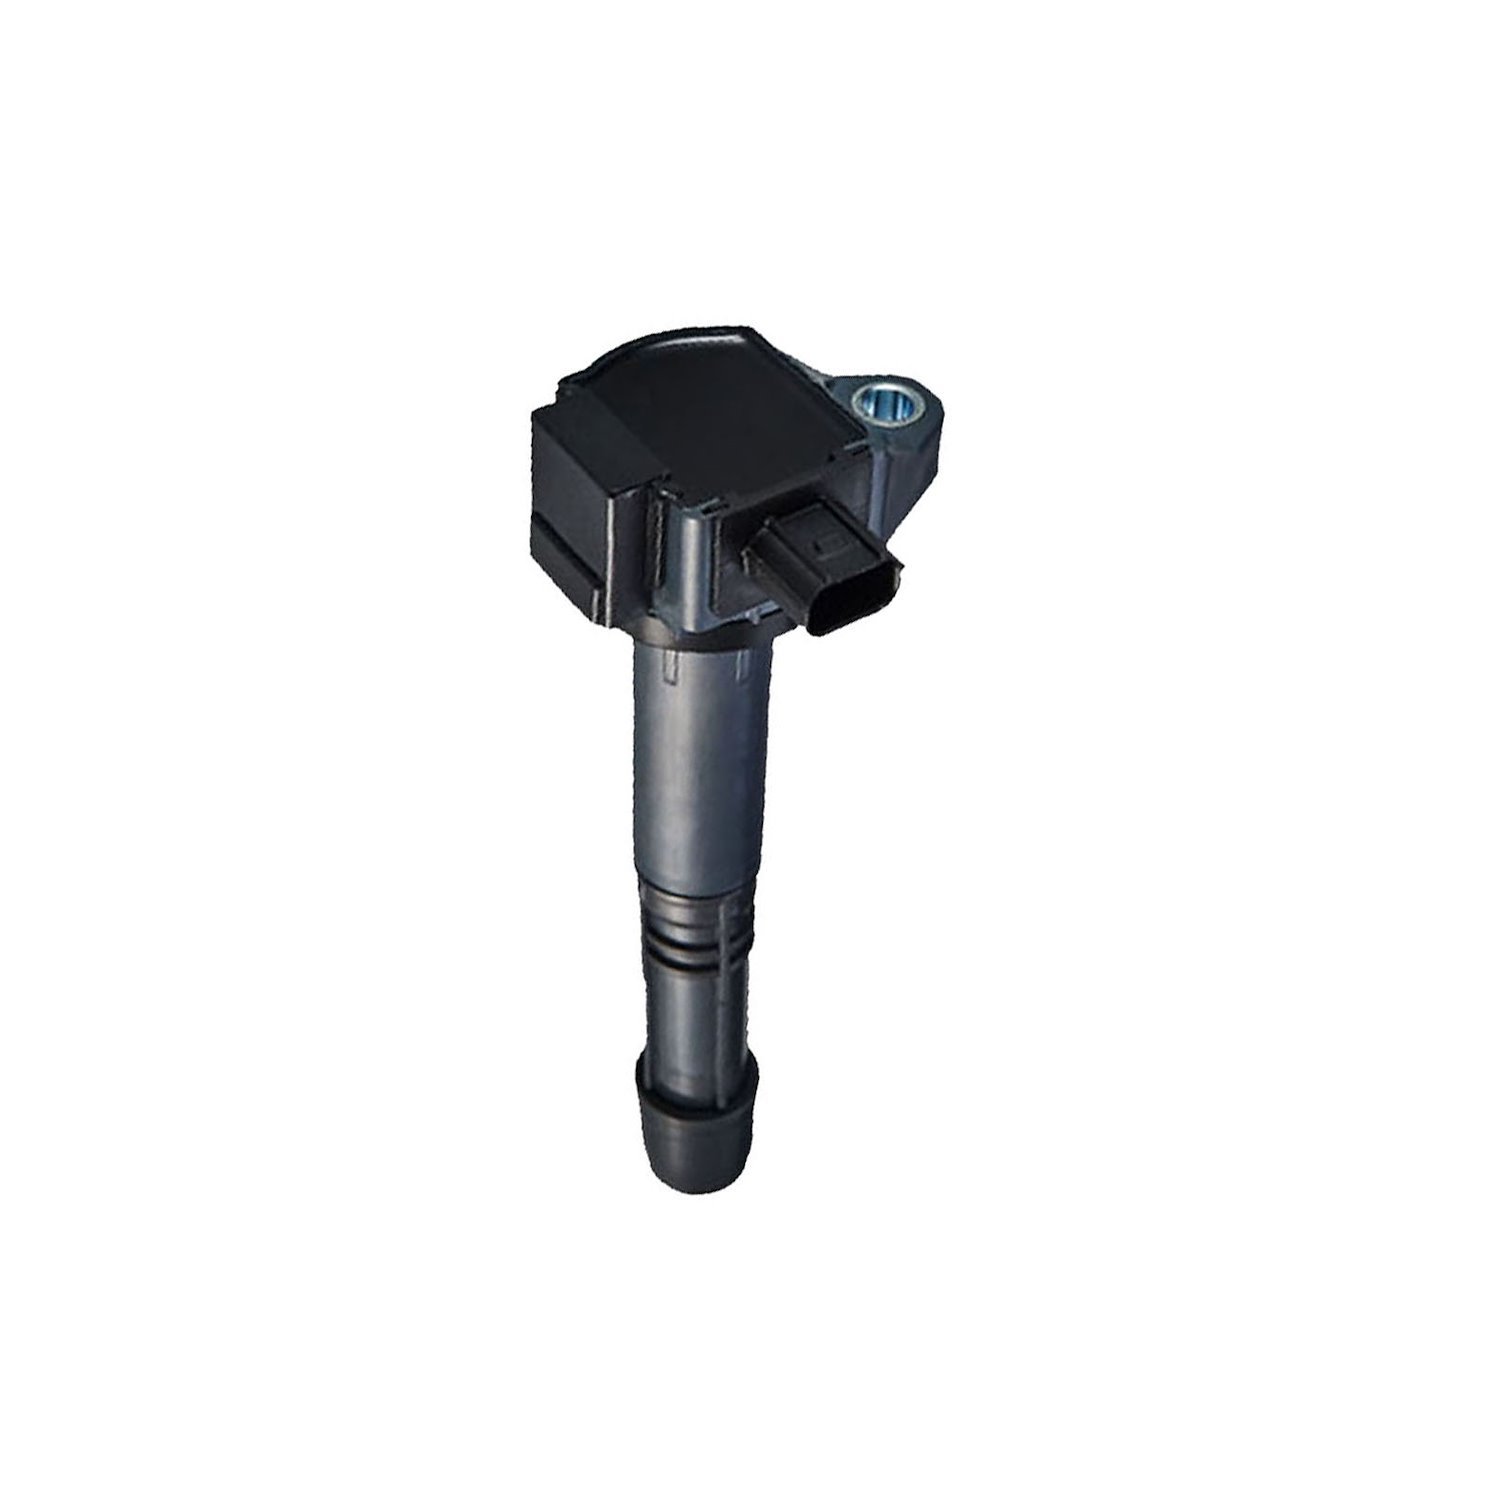 OE Replacement Ignition Coil for Honda Accord CR-V,